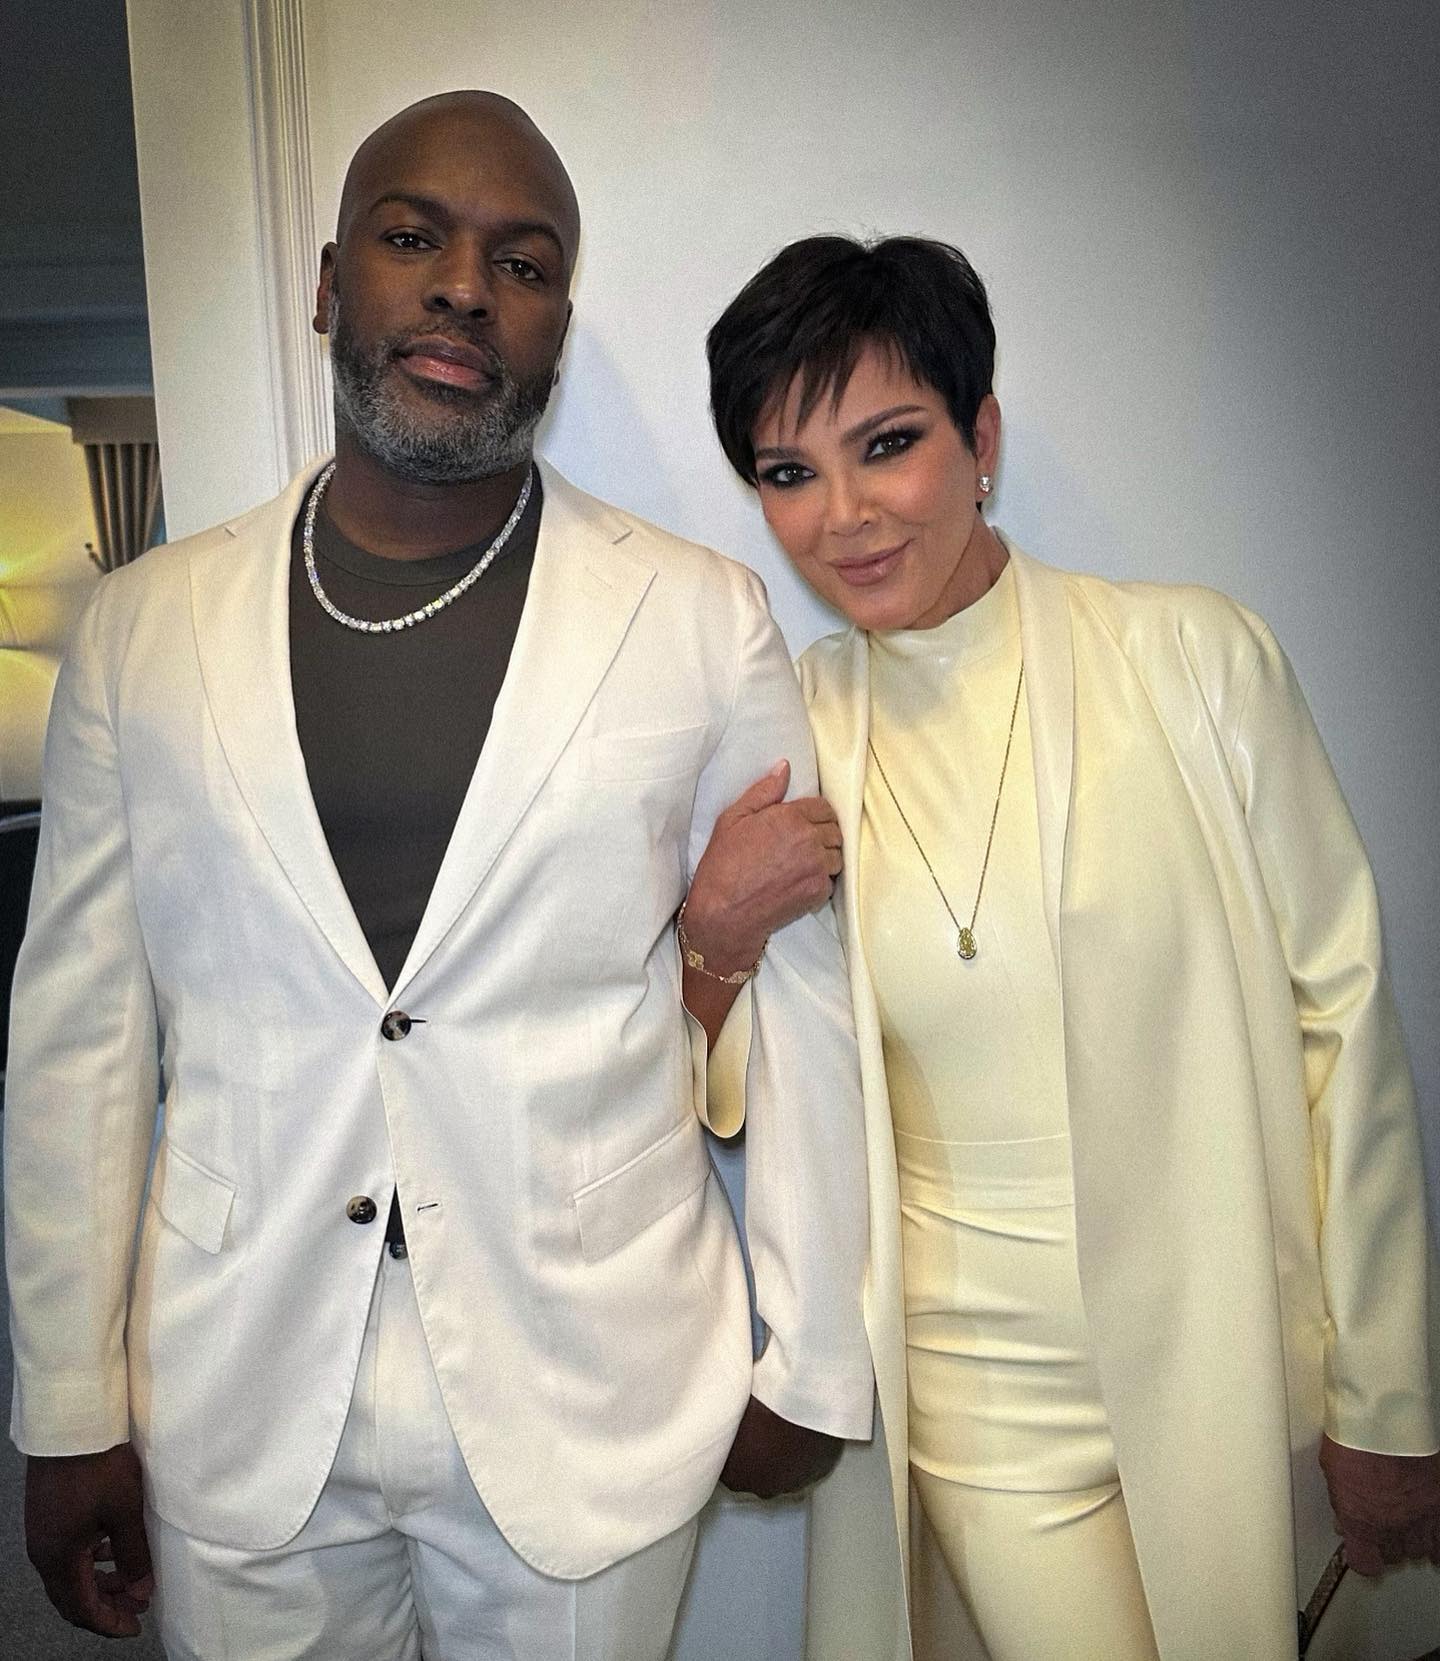 Kris was also at lunch with her partner Corey Gamble